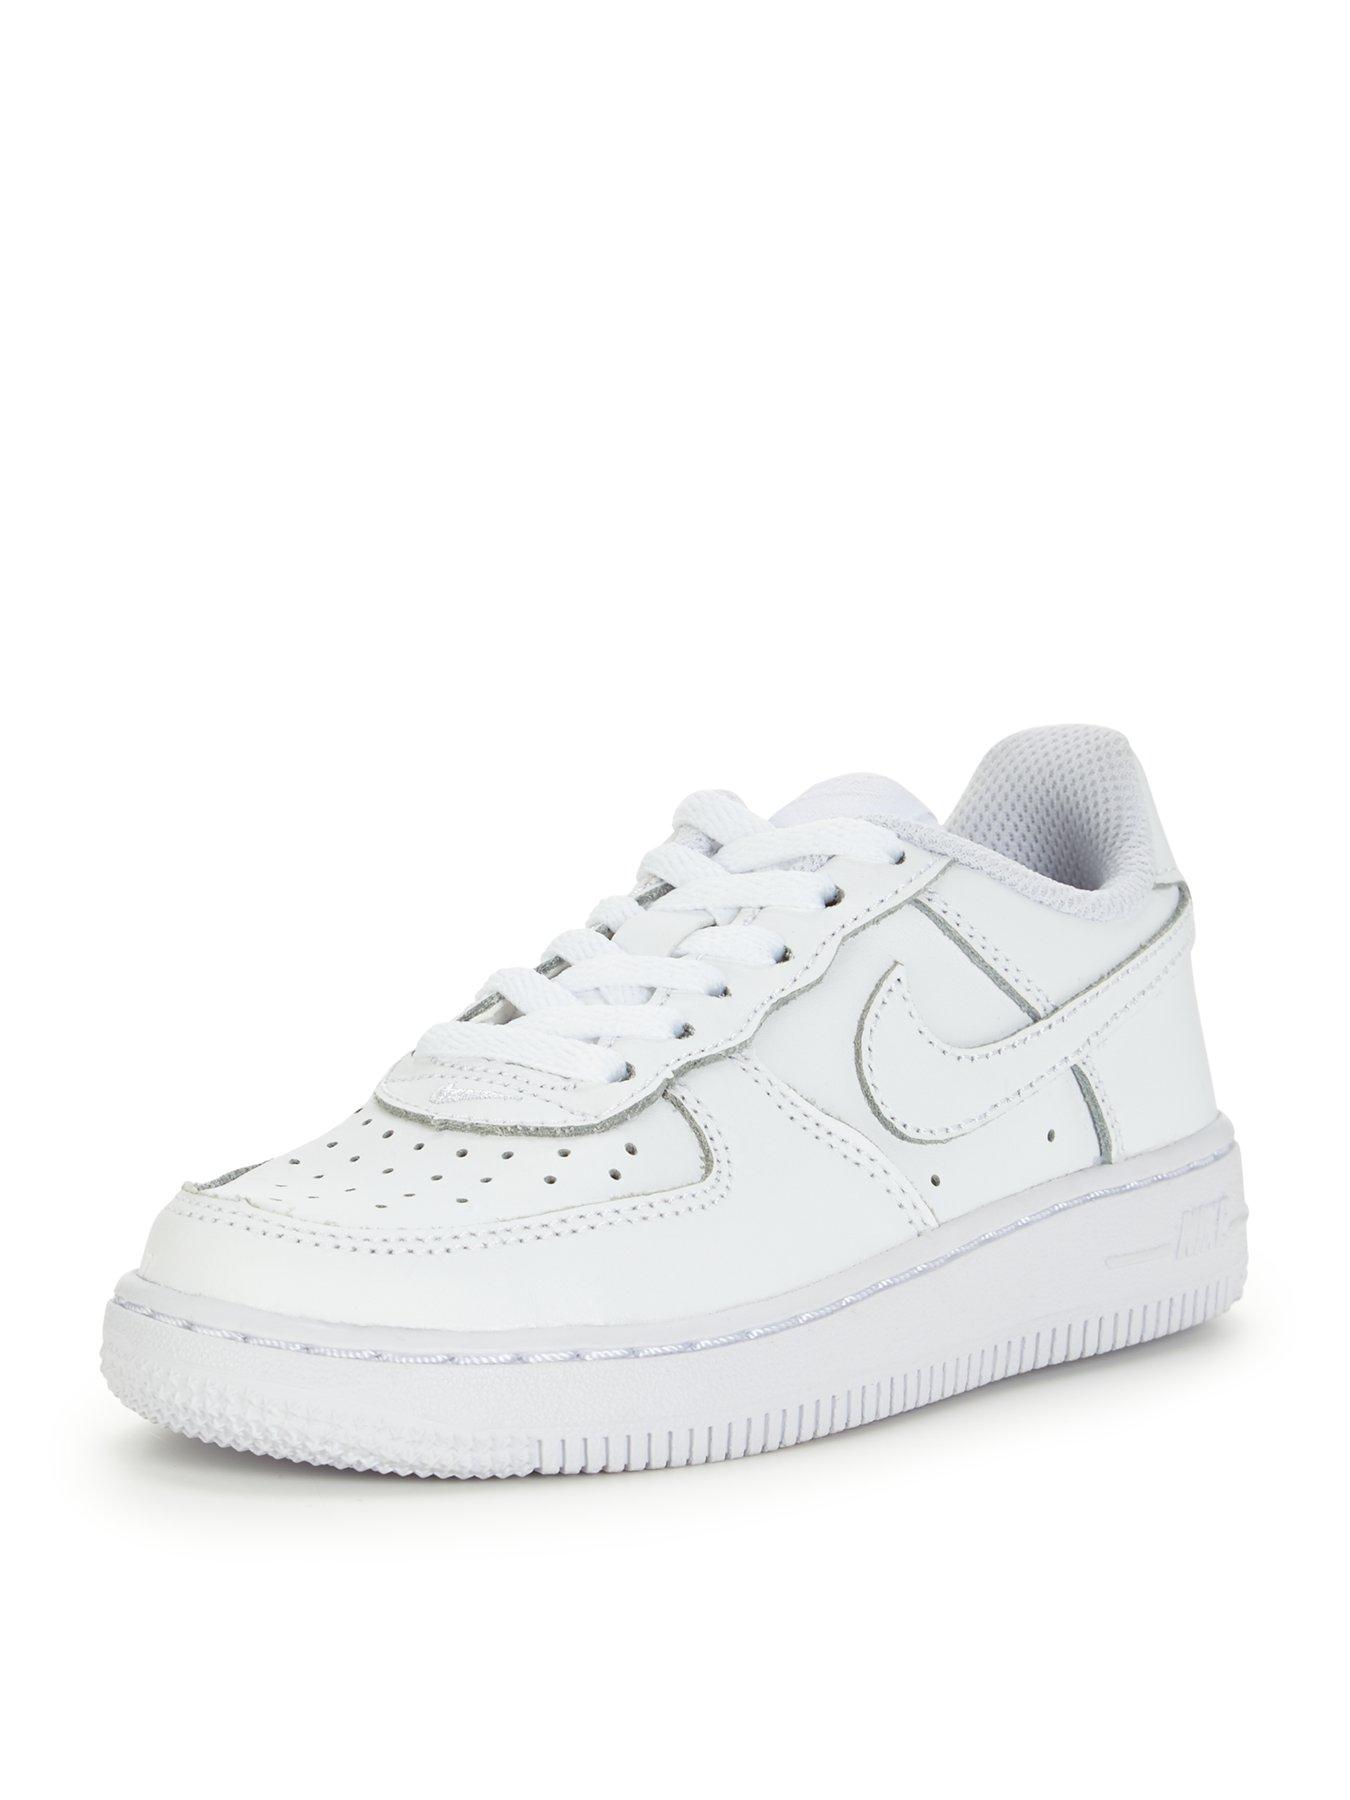 nike air force 1 low junior white online -